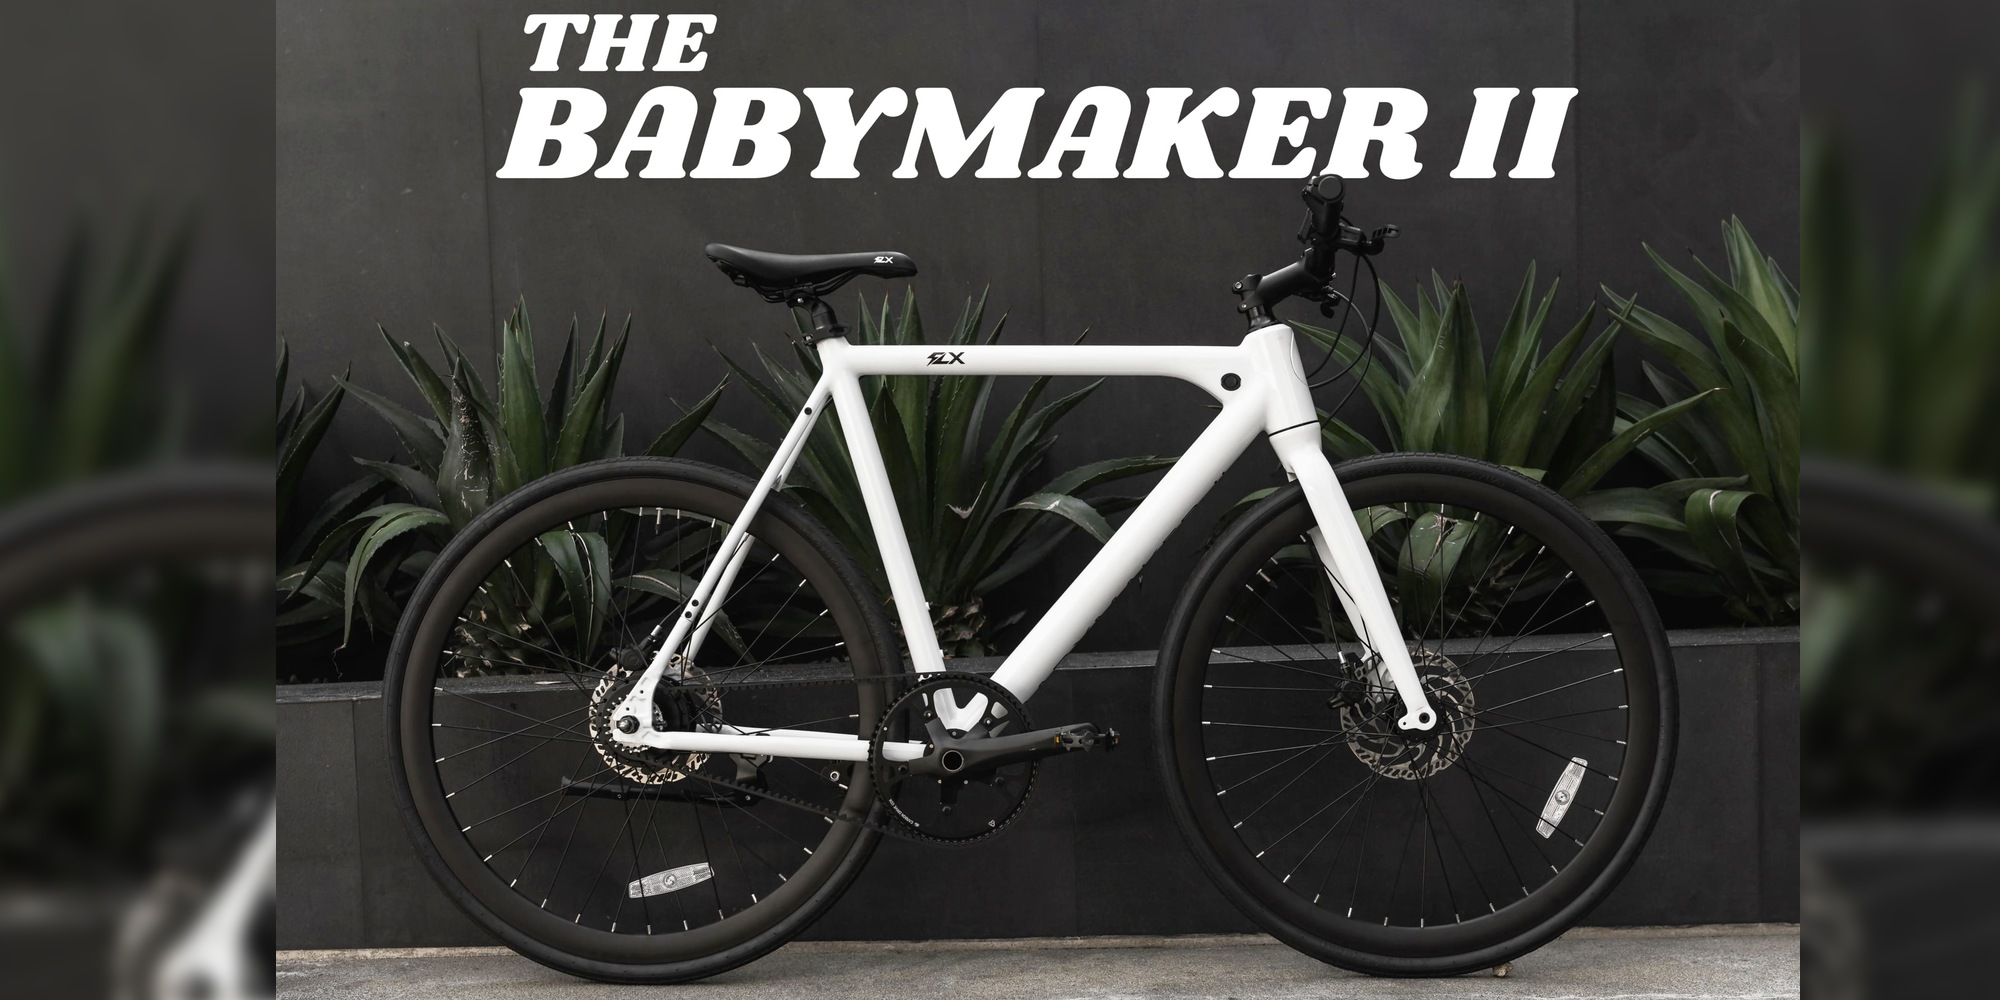 The BabyMaker electric bike is back again after pulling in $13M in 